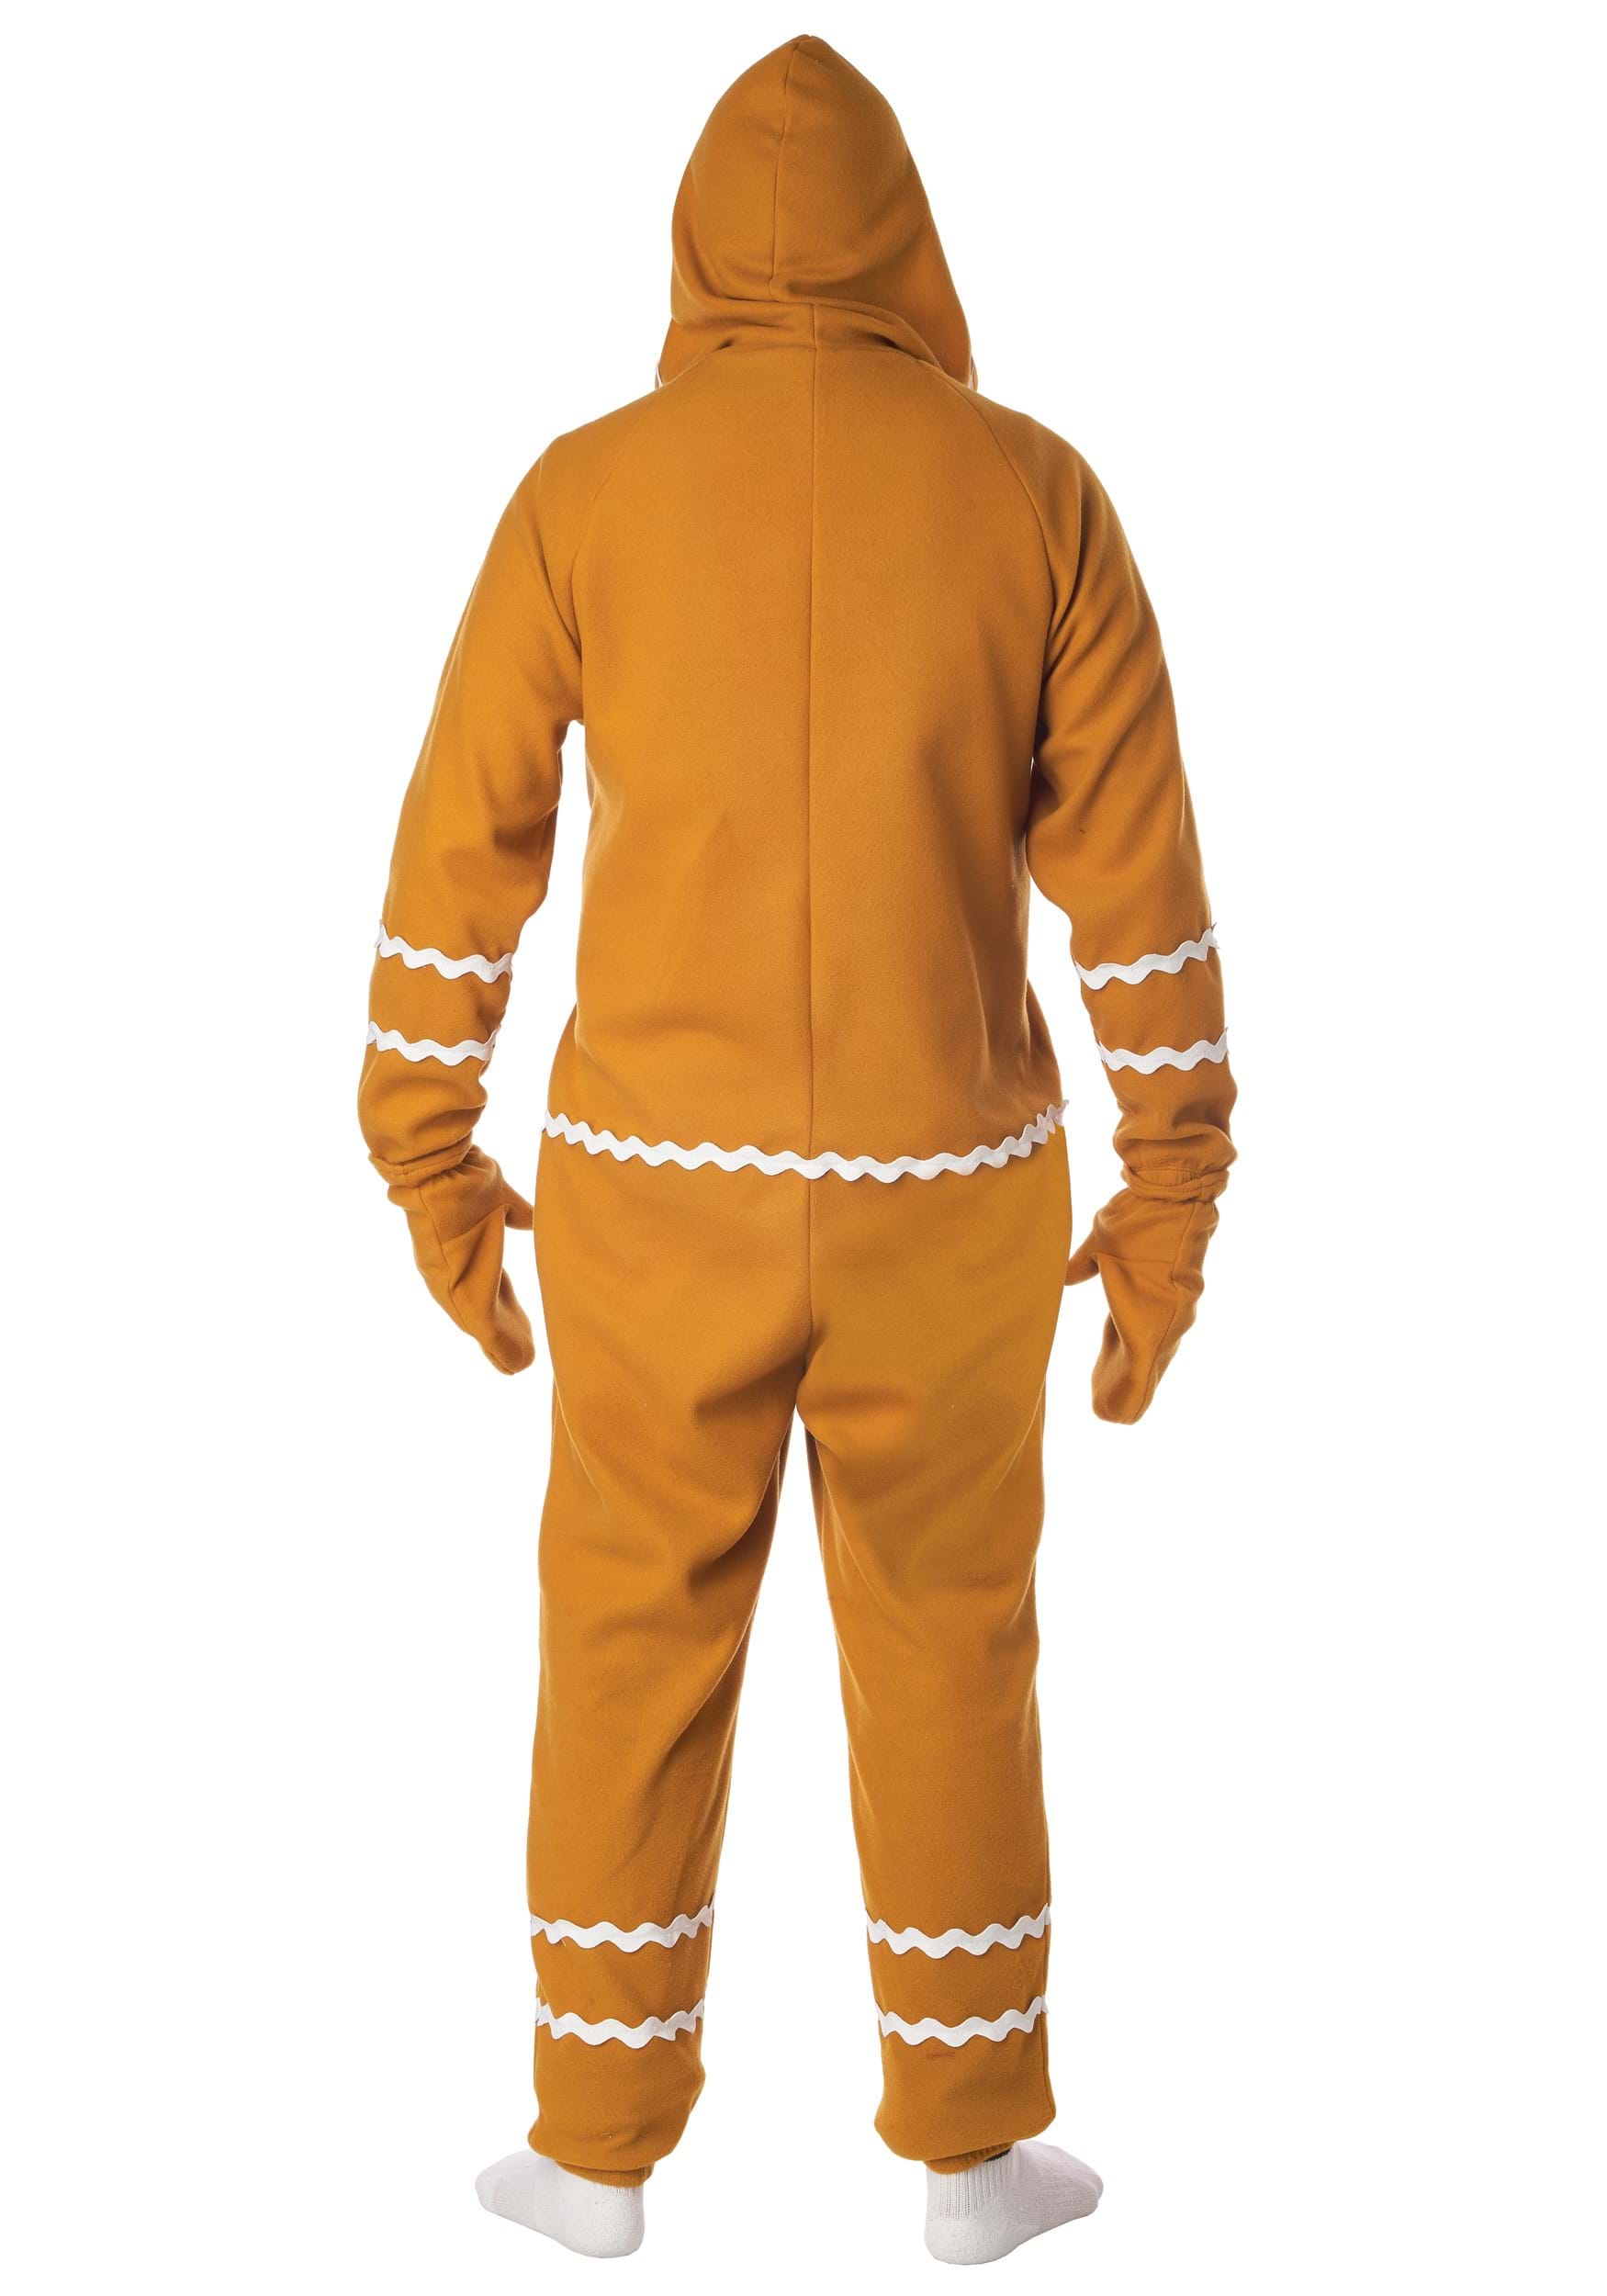 Gingerbread Jumpsuit Costume For Adults